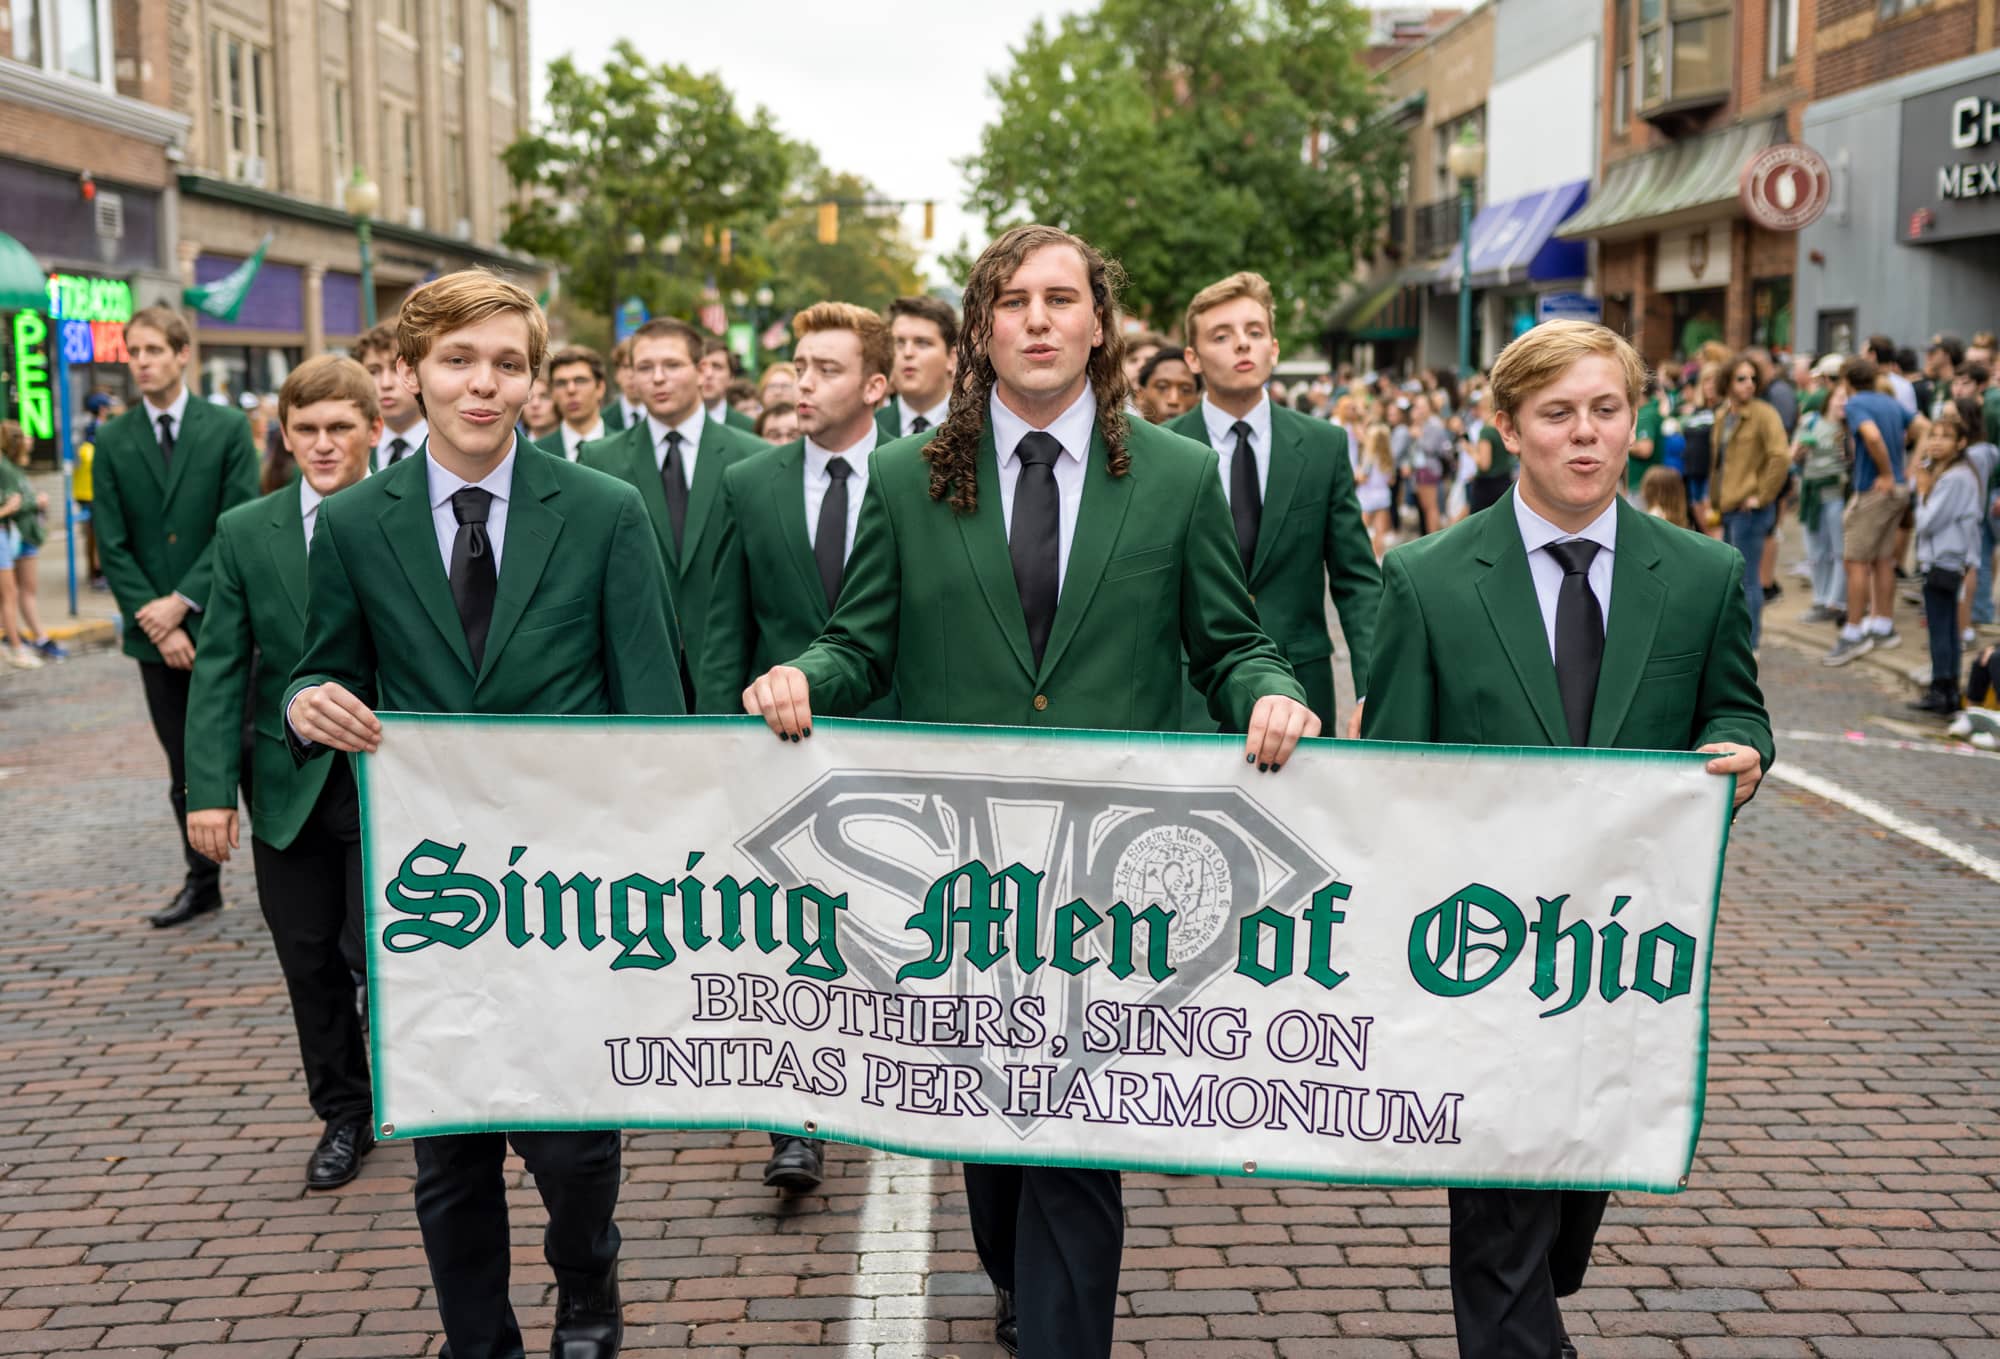 Members of the Singing Men of Ohio participate in the Homecoming Parade. 